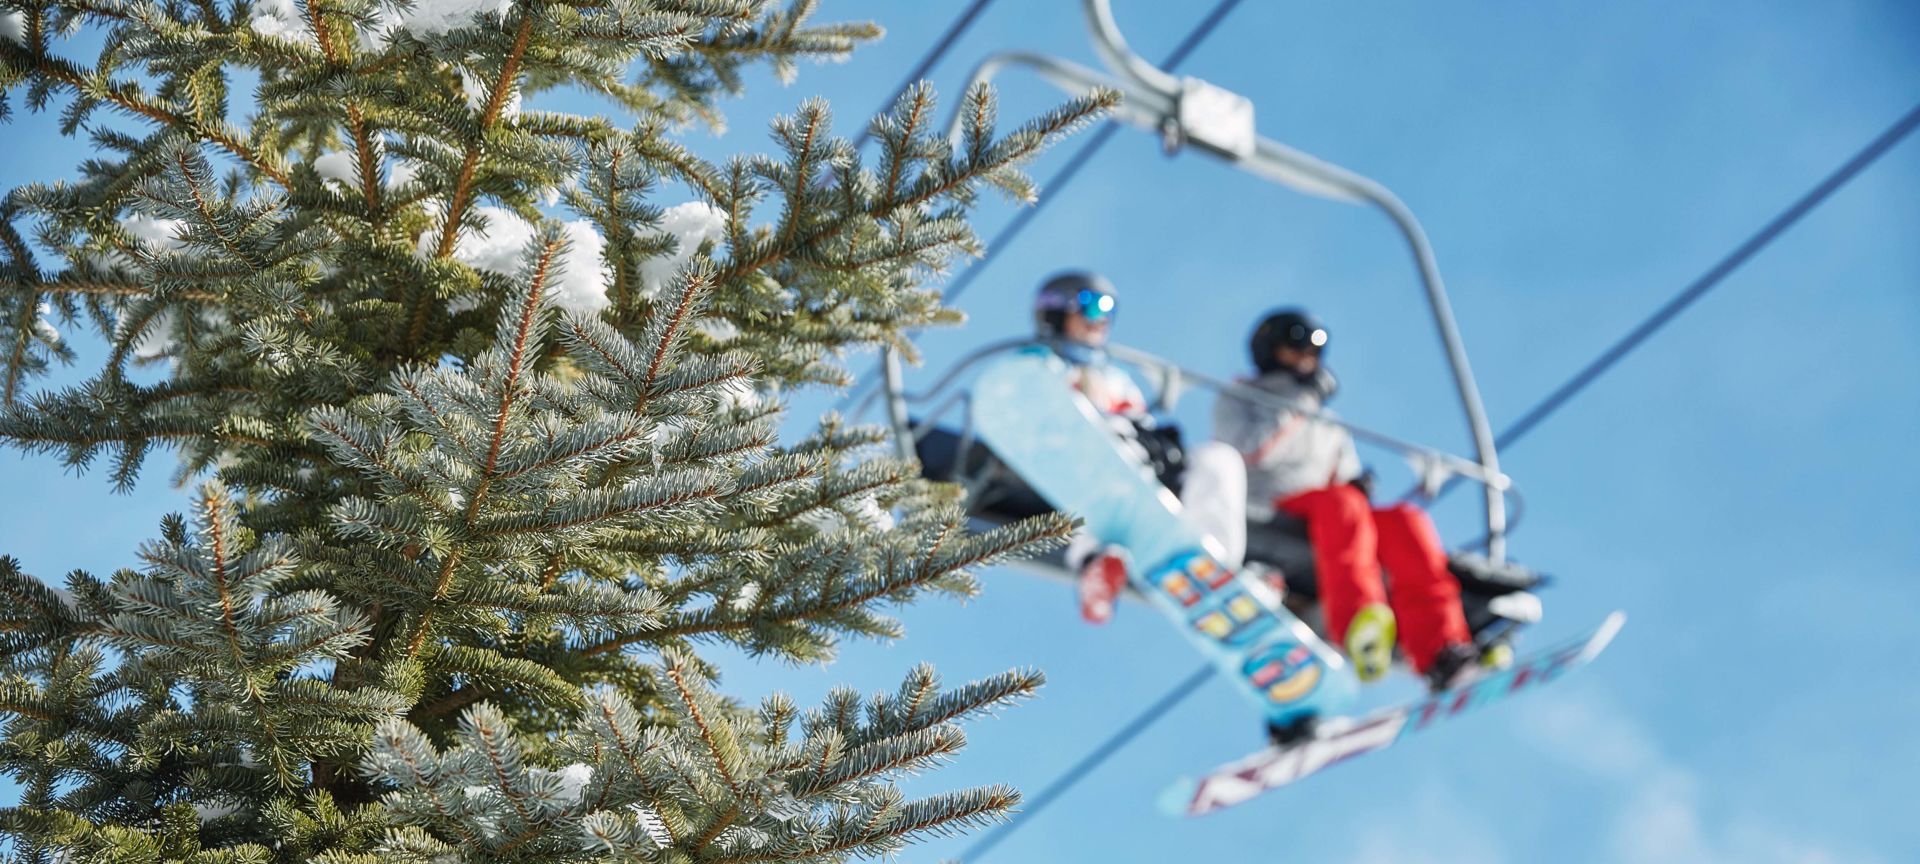 A Person Flying Through The Air While Riding Skis